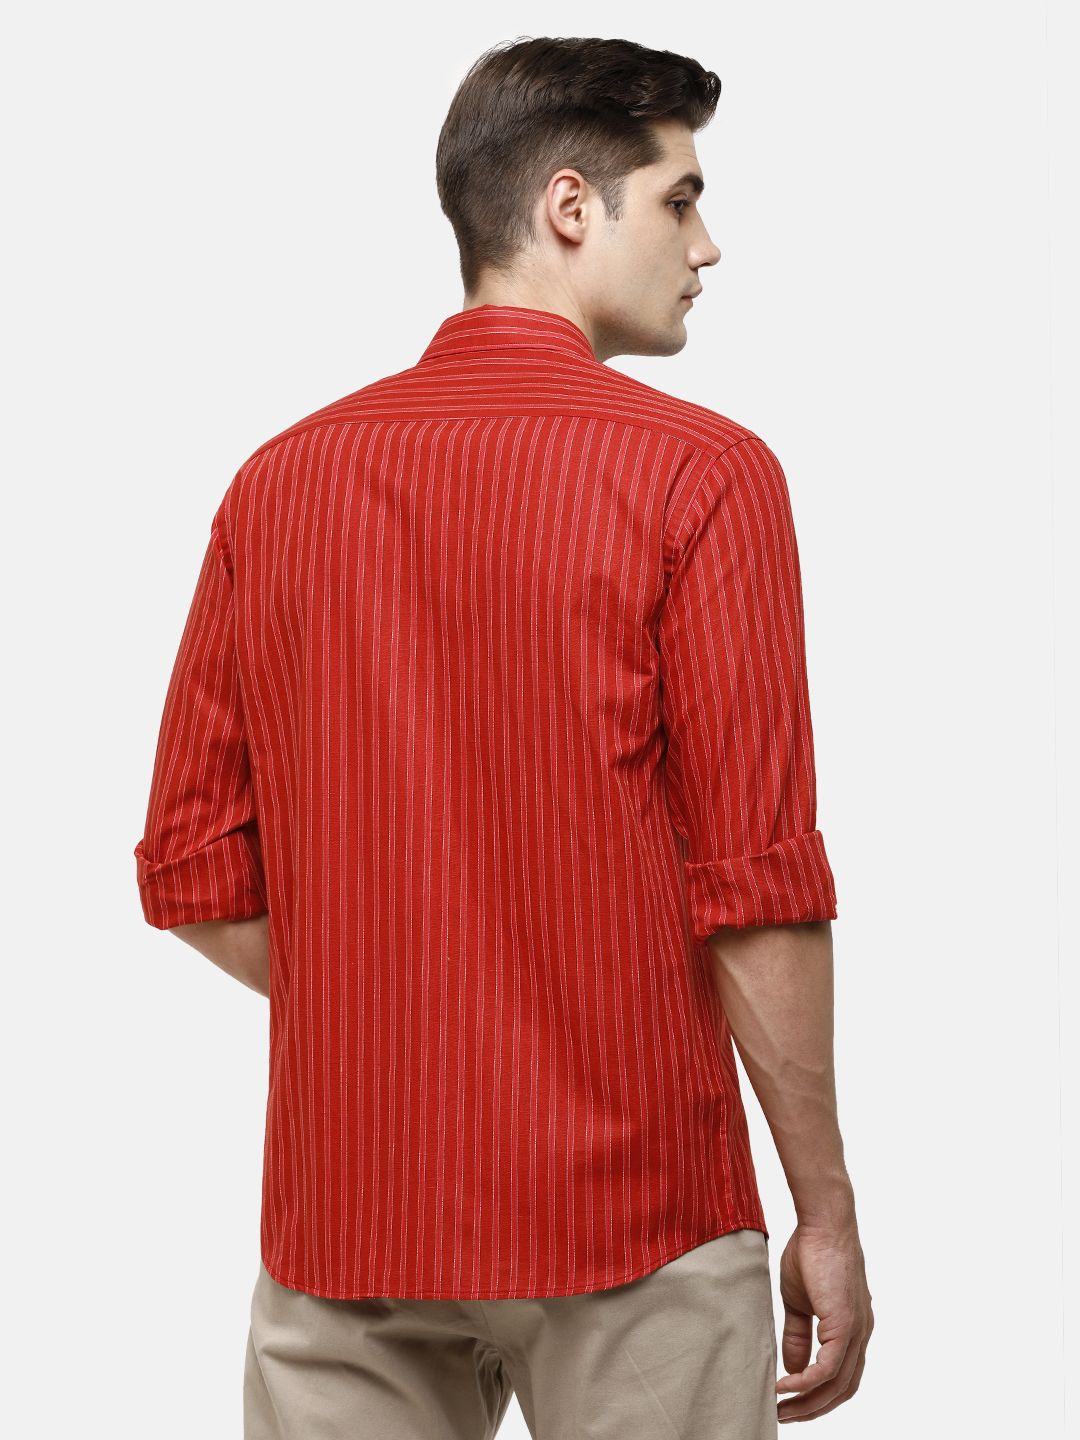 Cavallo By Linen Club Casual Shirts : Buy Cavallo By Linen Club Red Embellished  Casual Regular Fit Shirts Online